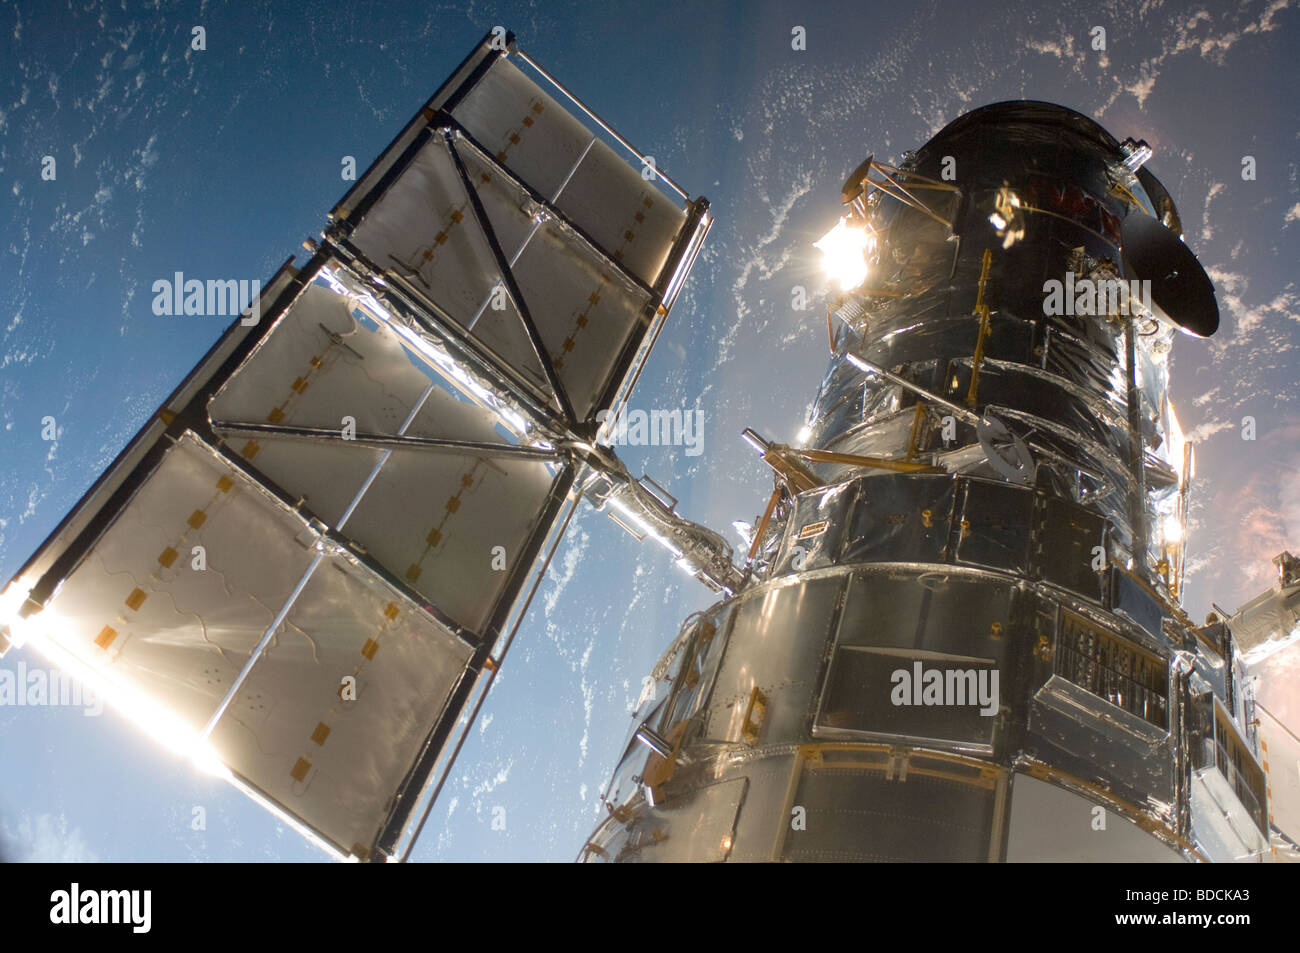 NASA Hubble Telescope in outer space Stock Photo